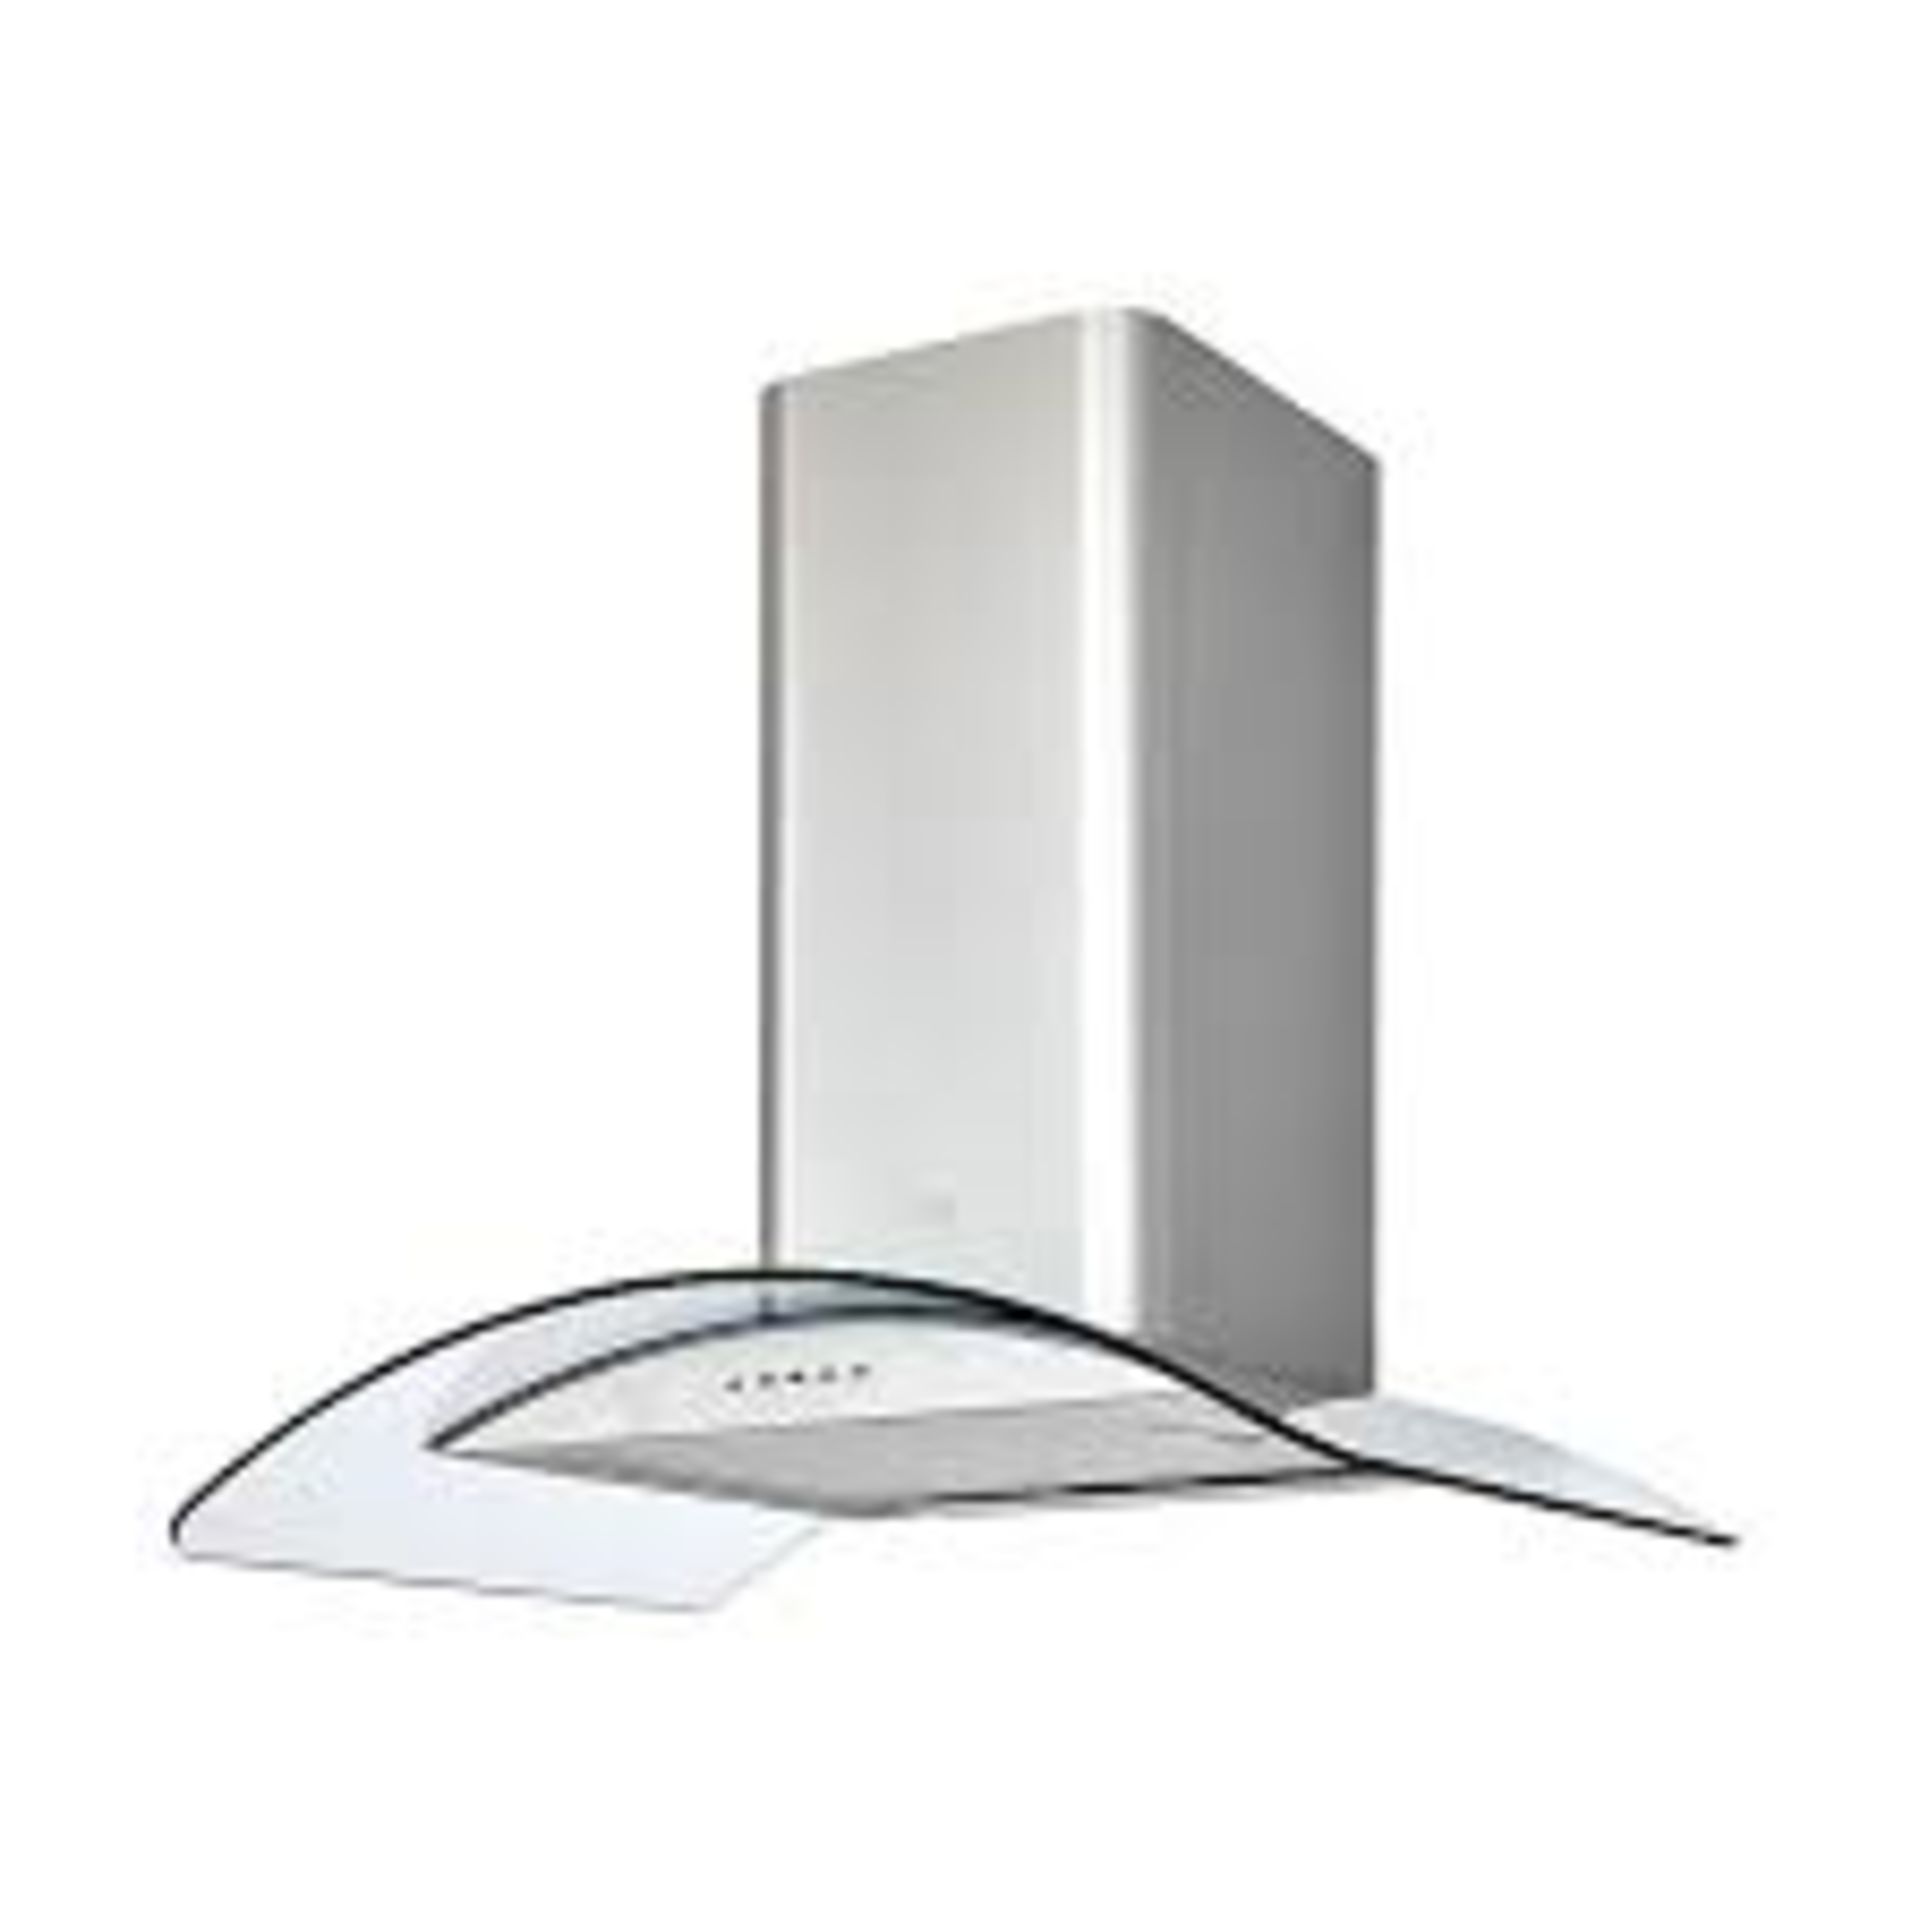 Cooke & Lewis CLCGS60 Stainless steel Curved Cooker hood. - PW.